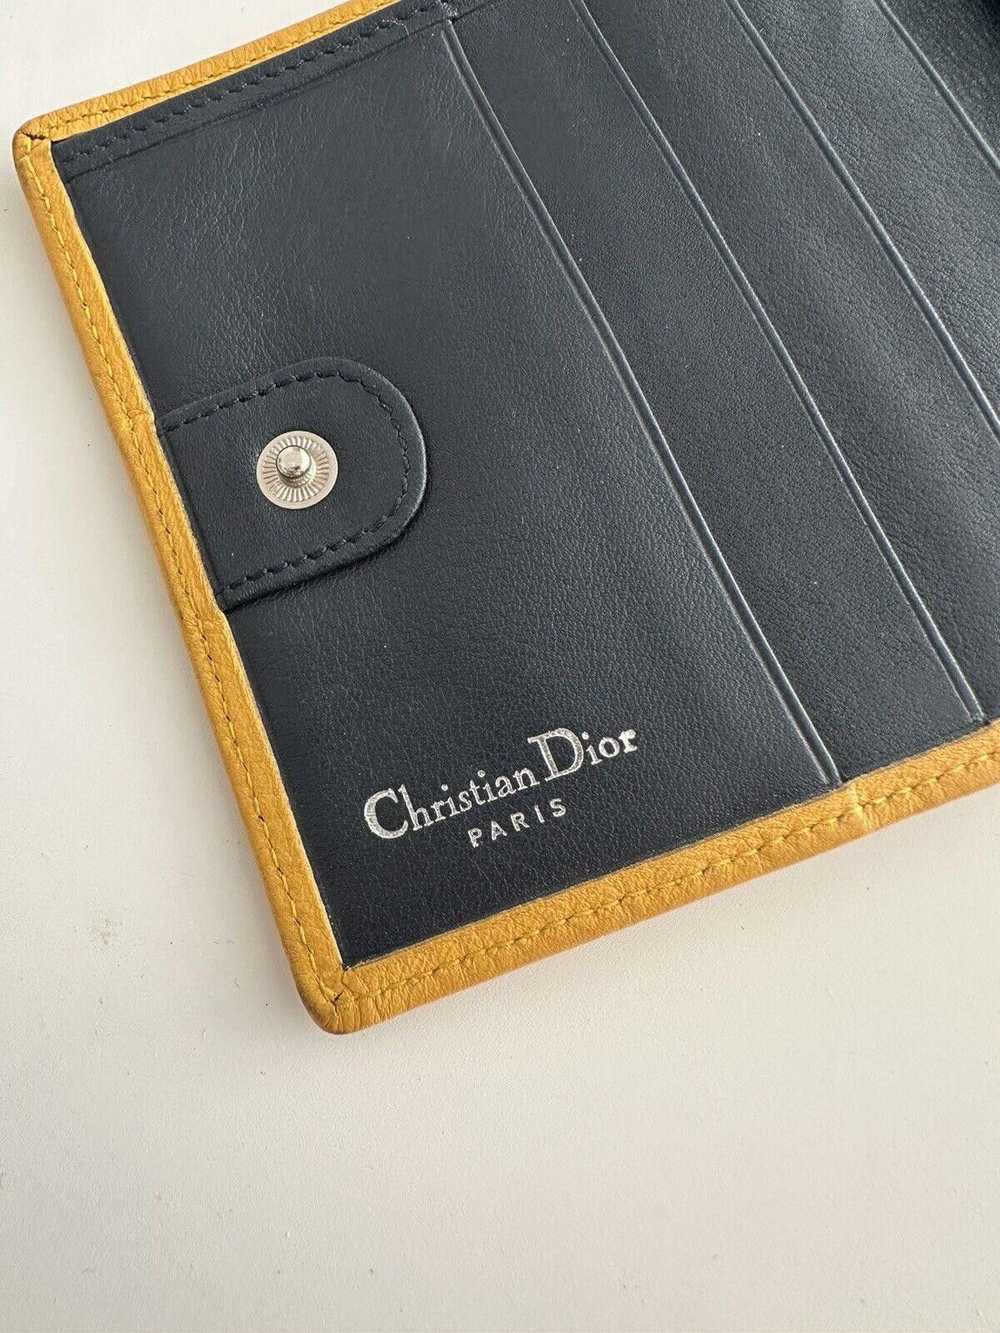 Dior christian dior yellow leather wallet - image 3